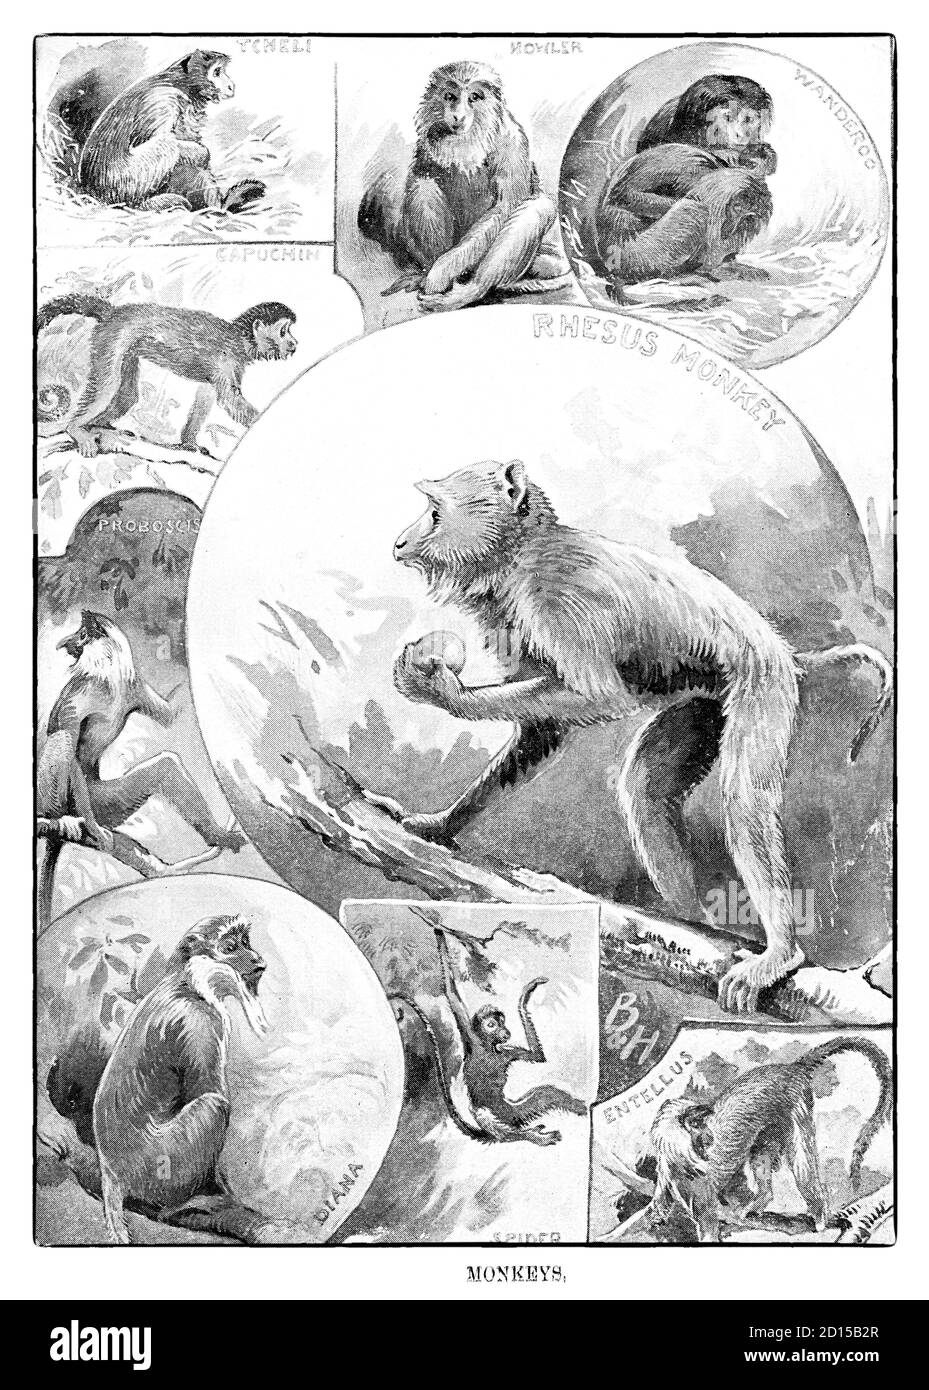 A late 19th Century collage illustrating various monkeys, a common name that refers to groups or species of mammals, in part, the simians of infraorder Simiiformes. The term is applied descriptively to groups of primates, such as families of New World monkeys and Old World monkeys. Many monkey species are tree-dwelling (arboreal), although there are species that live primarily on the ground, such as baboons. Stock Photo